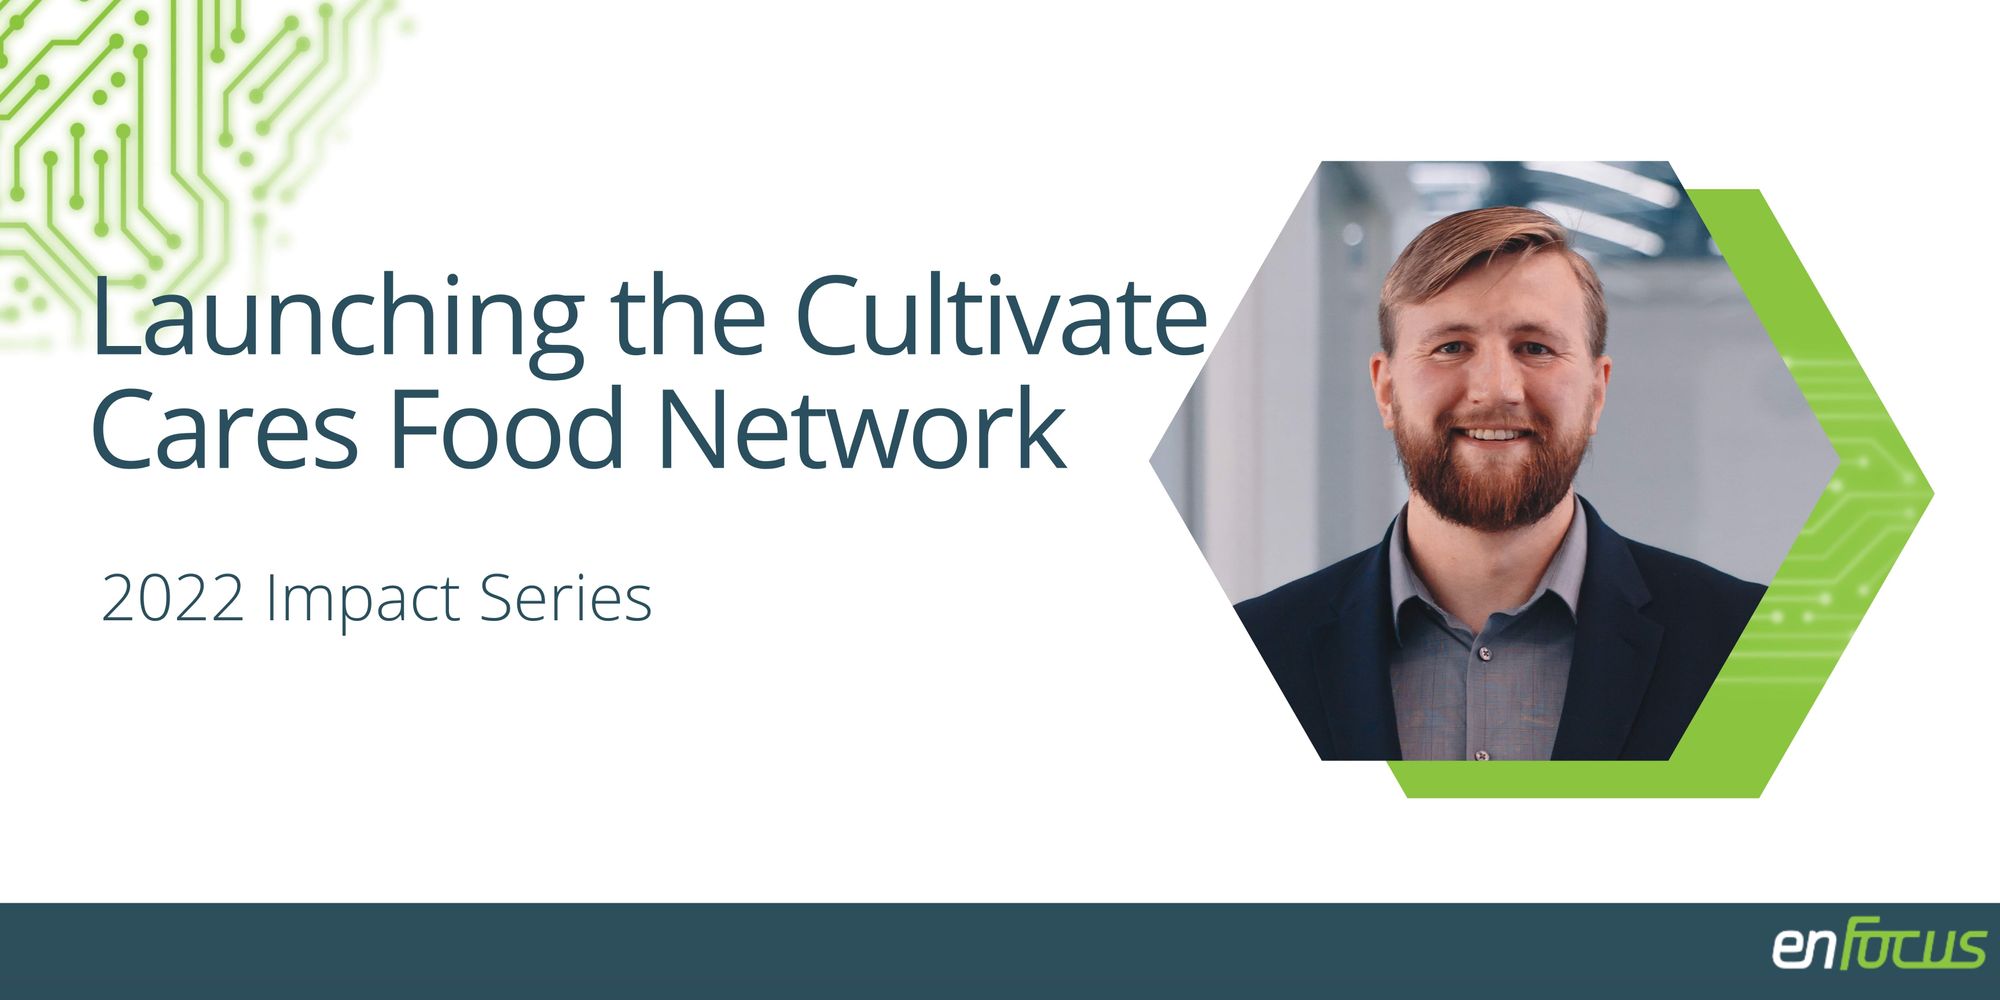 Maxx Hamm helps launch the Cultivate Cares Food Network